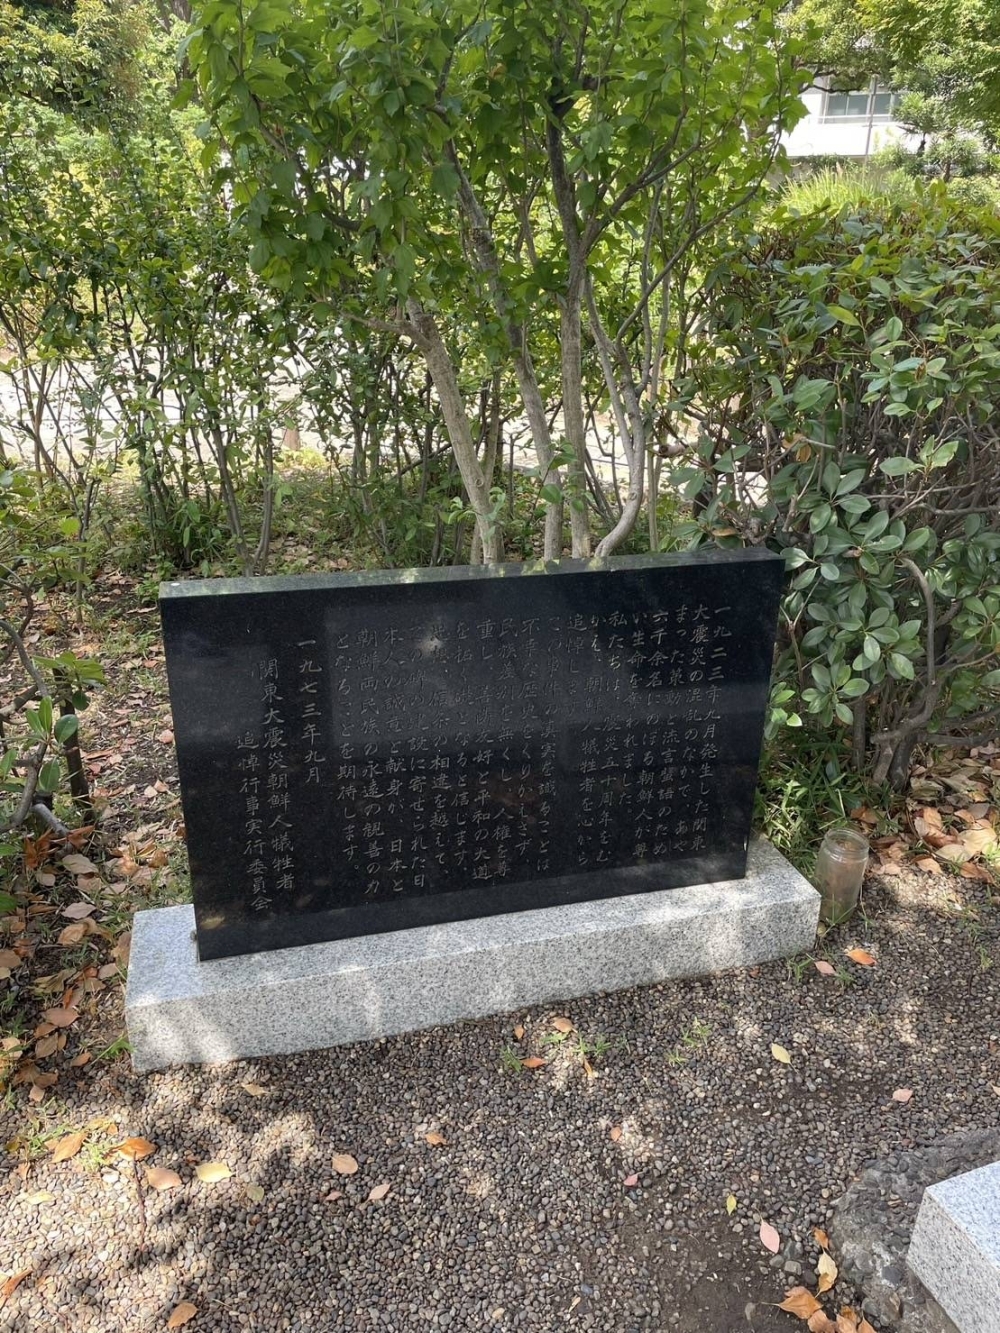 A black stone slab stands as a tribute to the reportedly 6,000 Koreans killed in the aftermath of the Great Kanto Earthquake. 